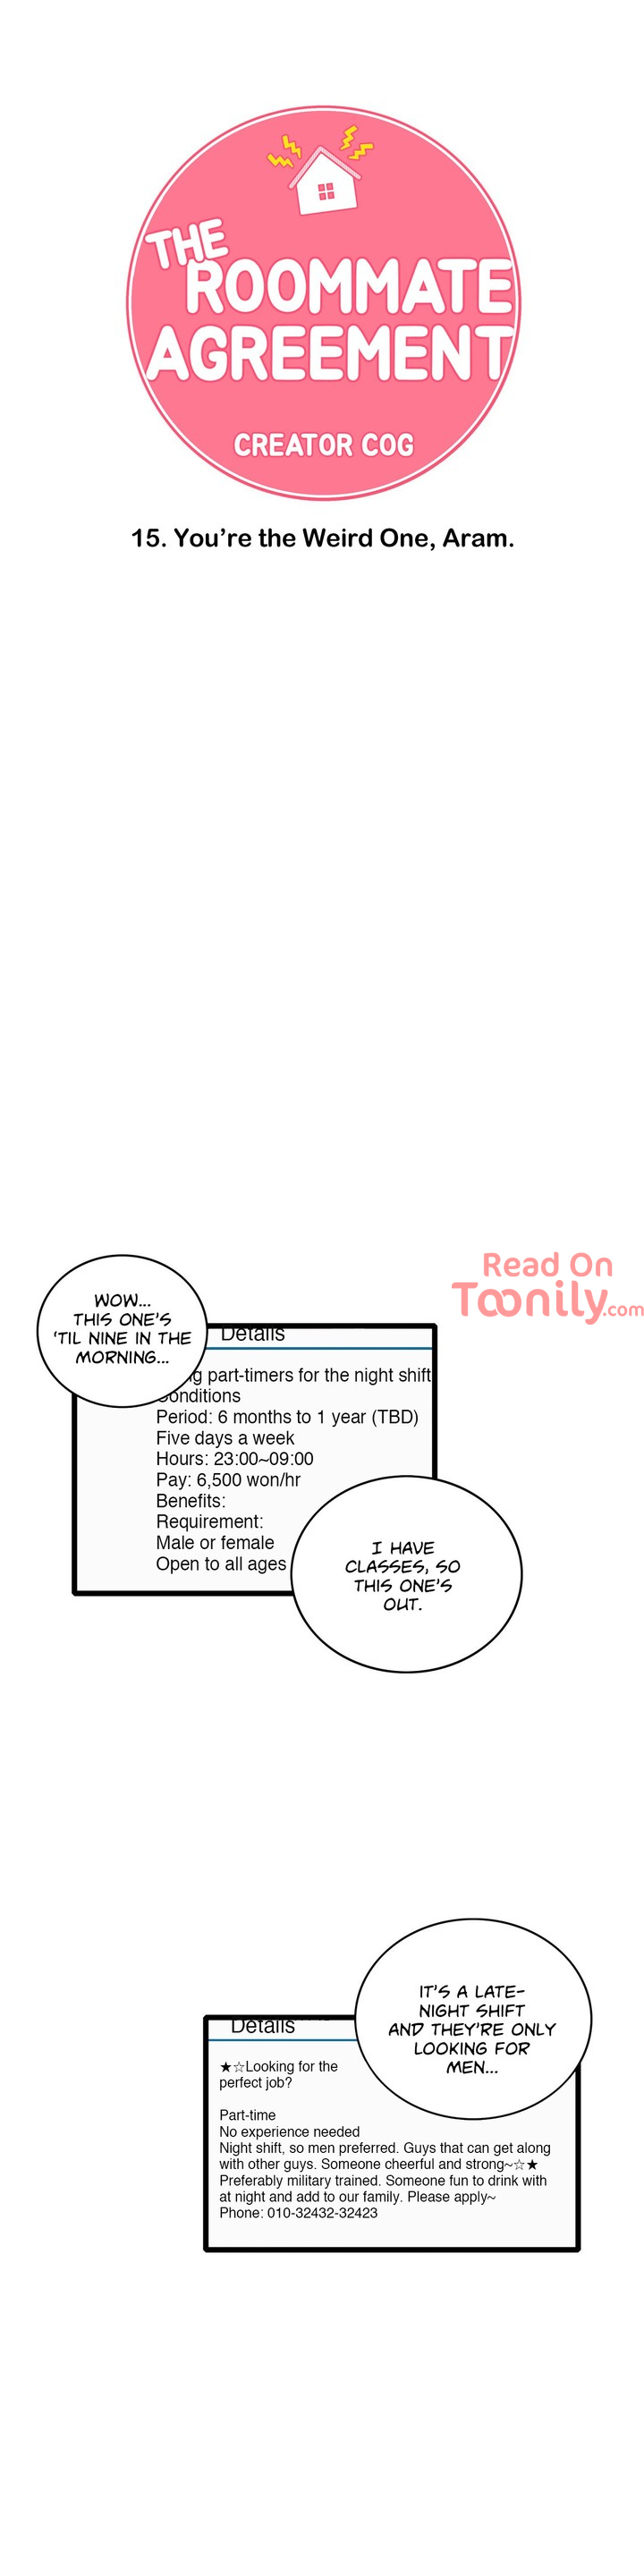 The Roommate Agreement image